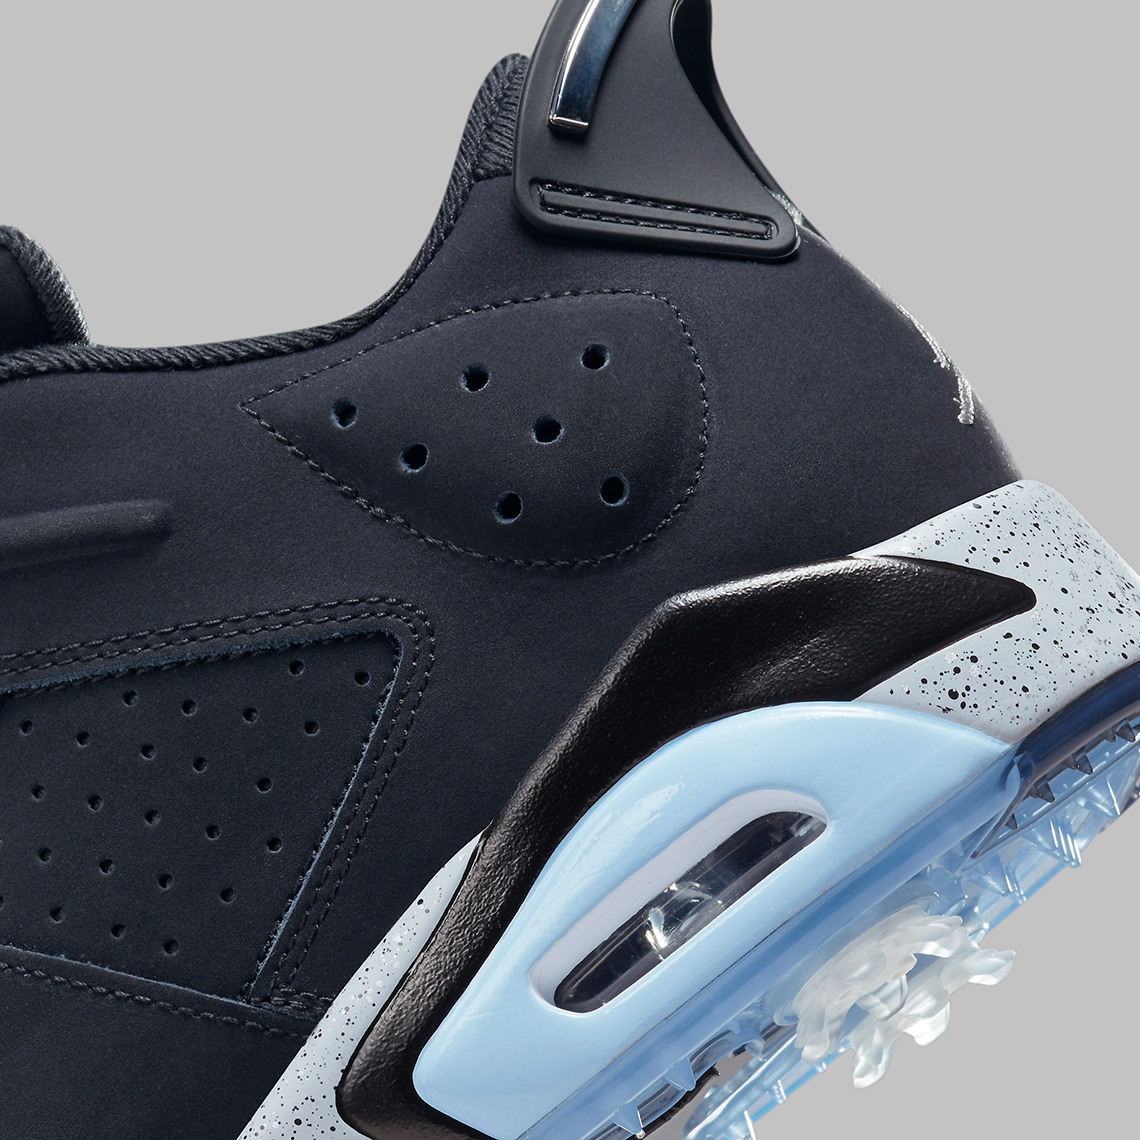 More images of the Air Jordan 5 Low in collaboration with Neymar have landed from